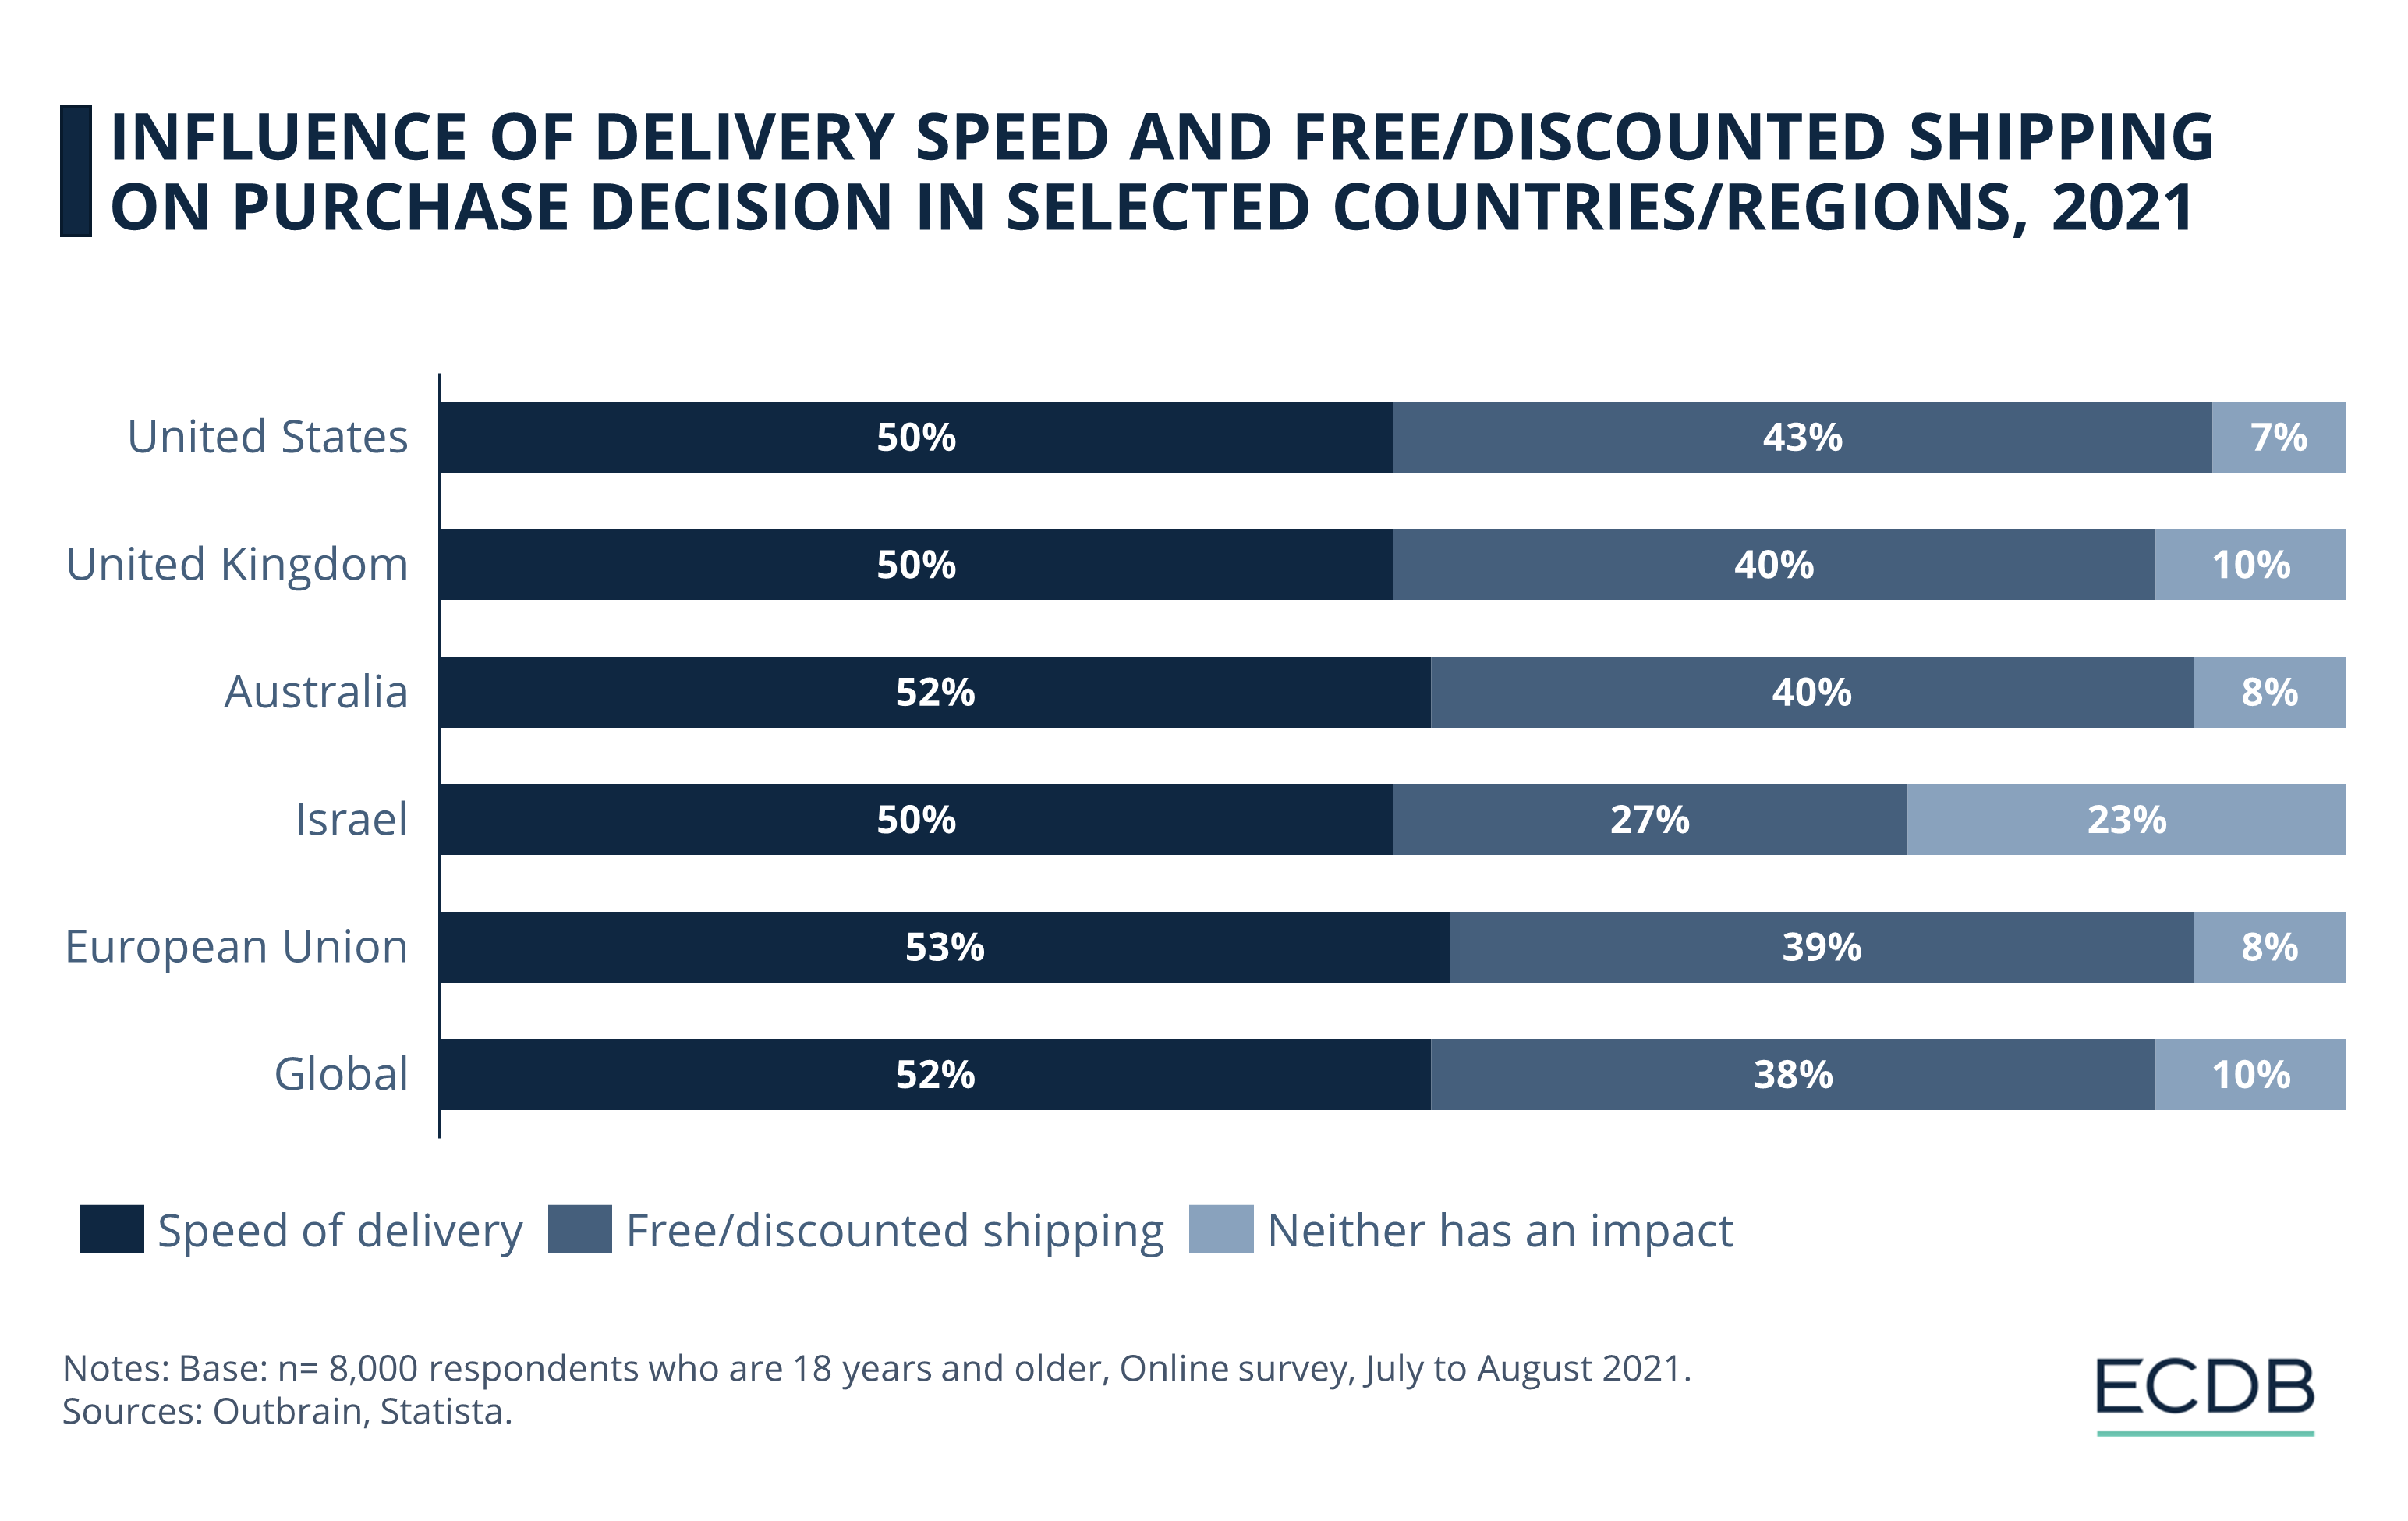 Influence of Delivery Speed and Free/Discounted Shipping on Purchase Decision in Selected Countries/Regions, 2021